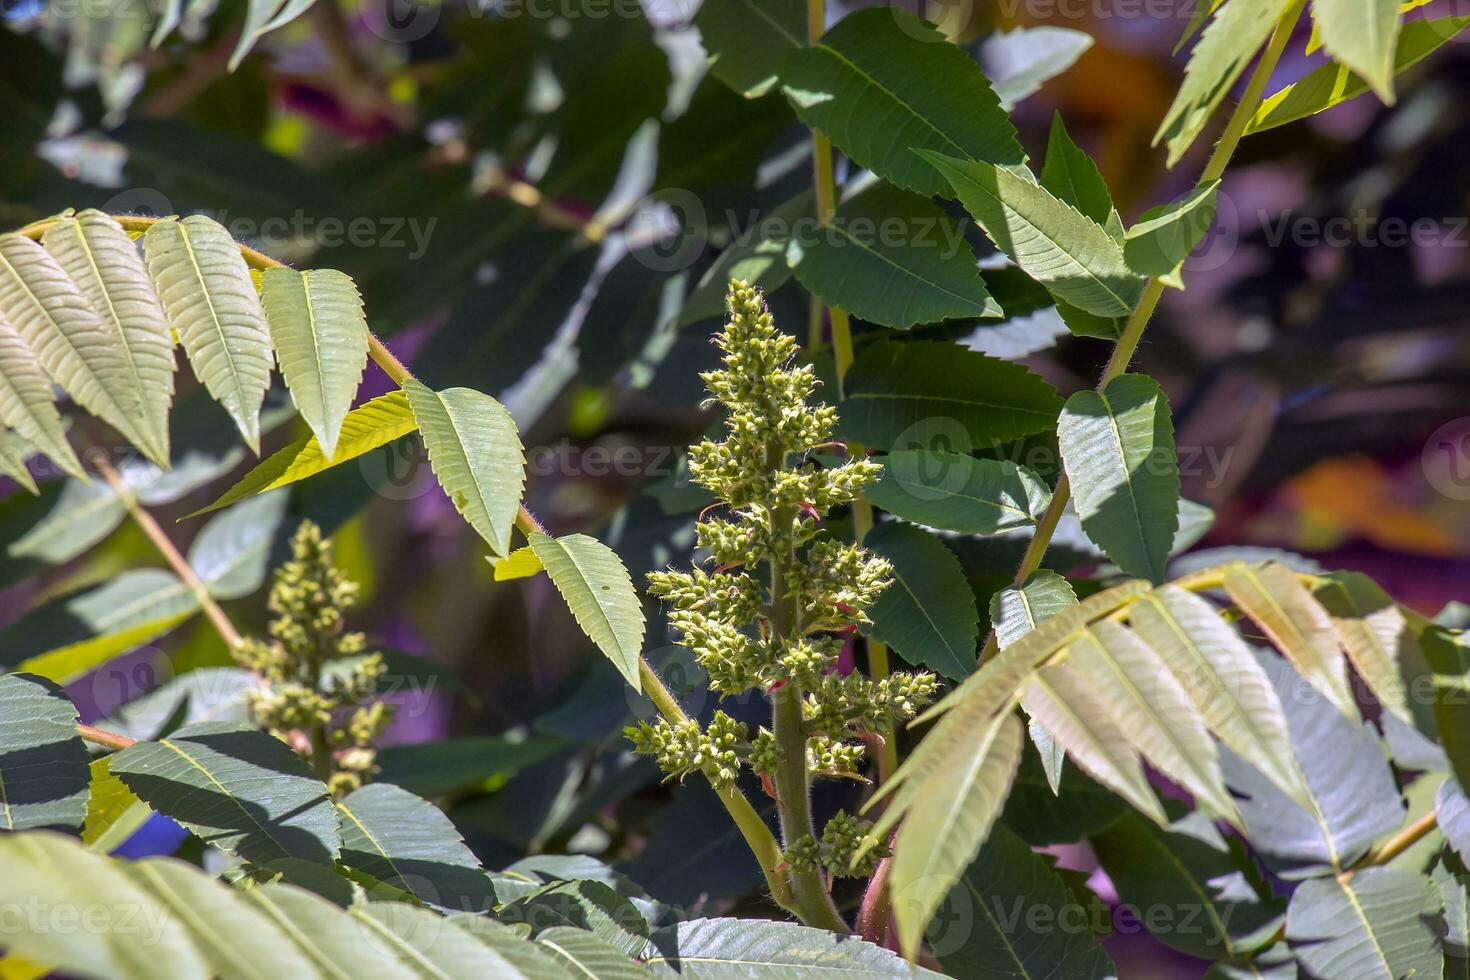 Rhus typhina before flowering. Rhus typhina, stag sumac, is a species of flowering plant in the Anacardiaceae family. photo